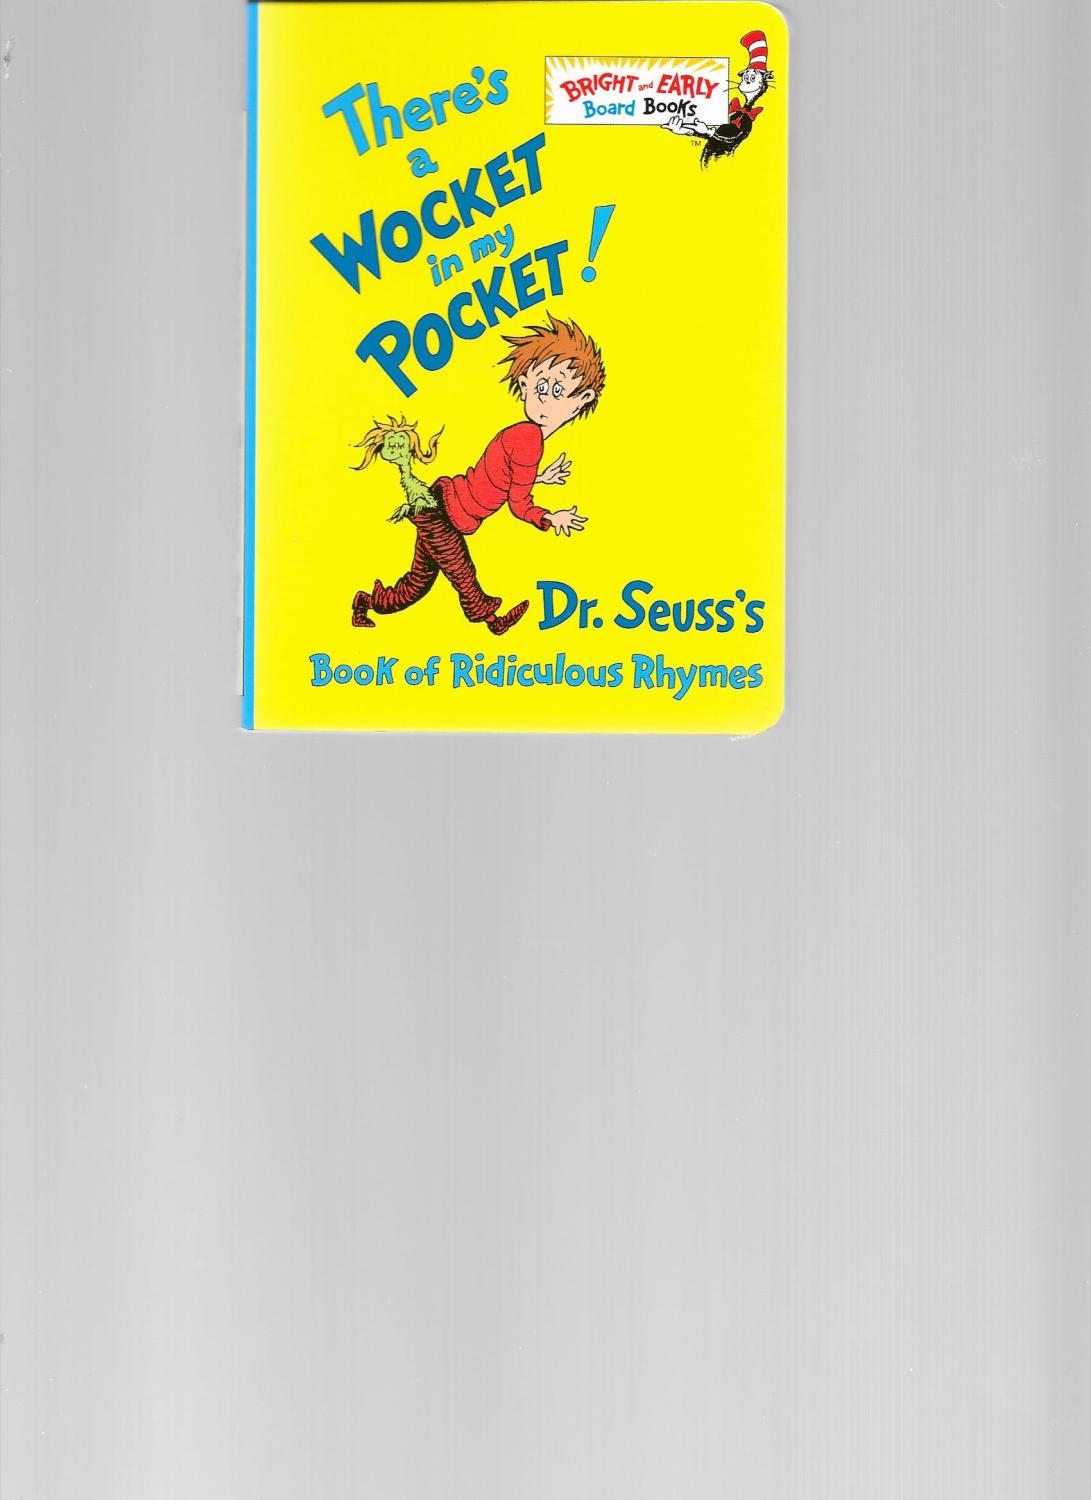 There S A Wocket In My Pocket Dr Seuss S Book Of Ridiculous Rhymes By Dr Seuss New Hardcover 1996 Tuosistbook